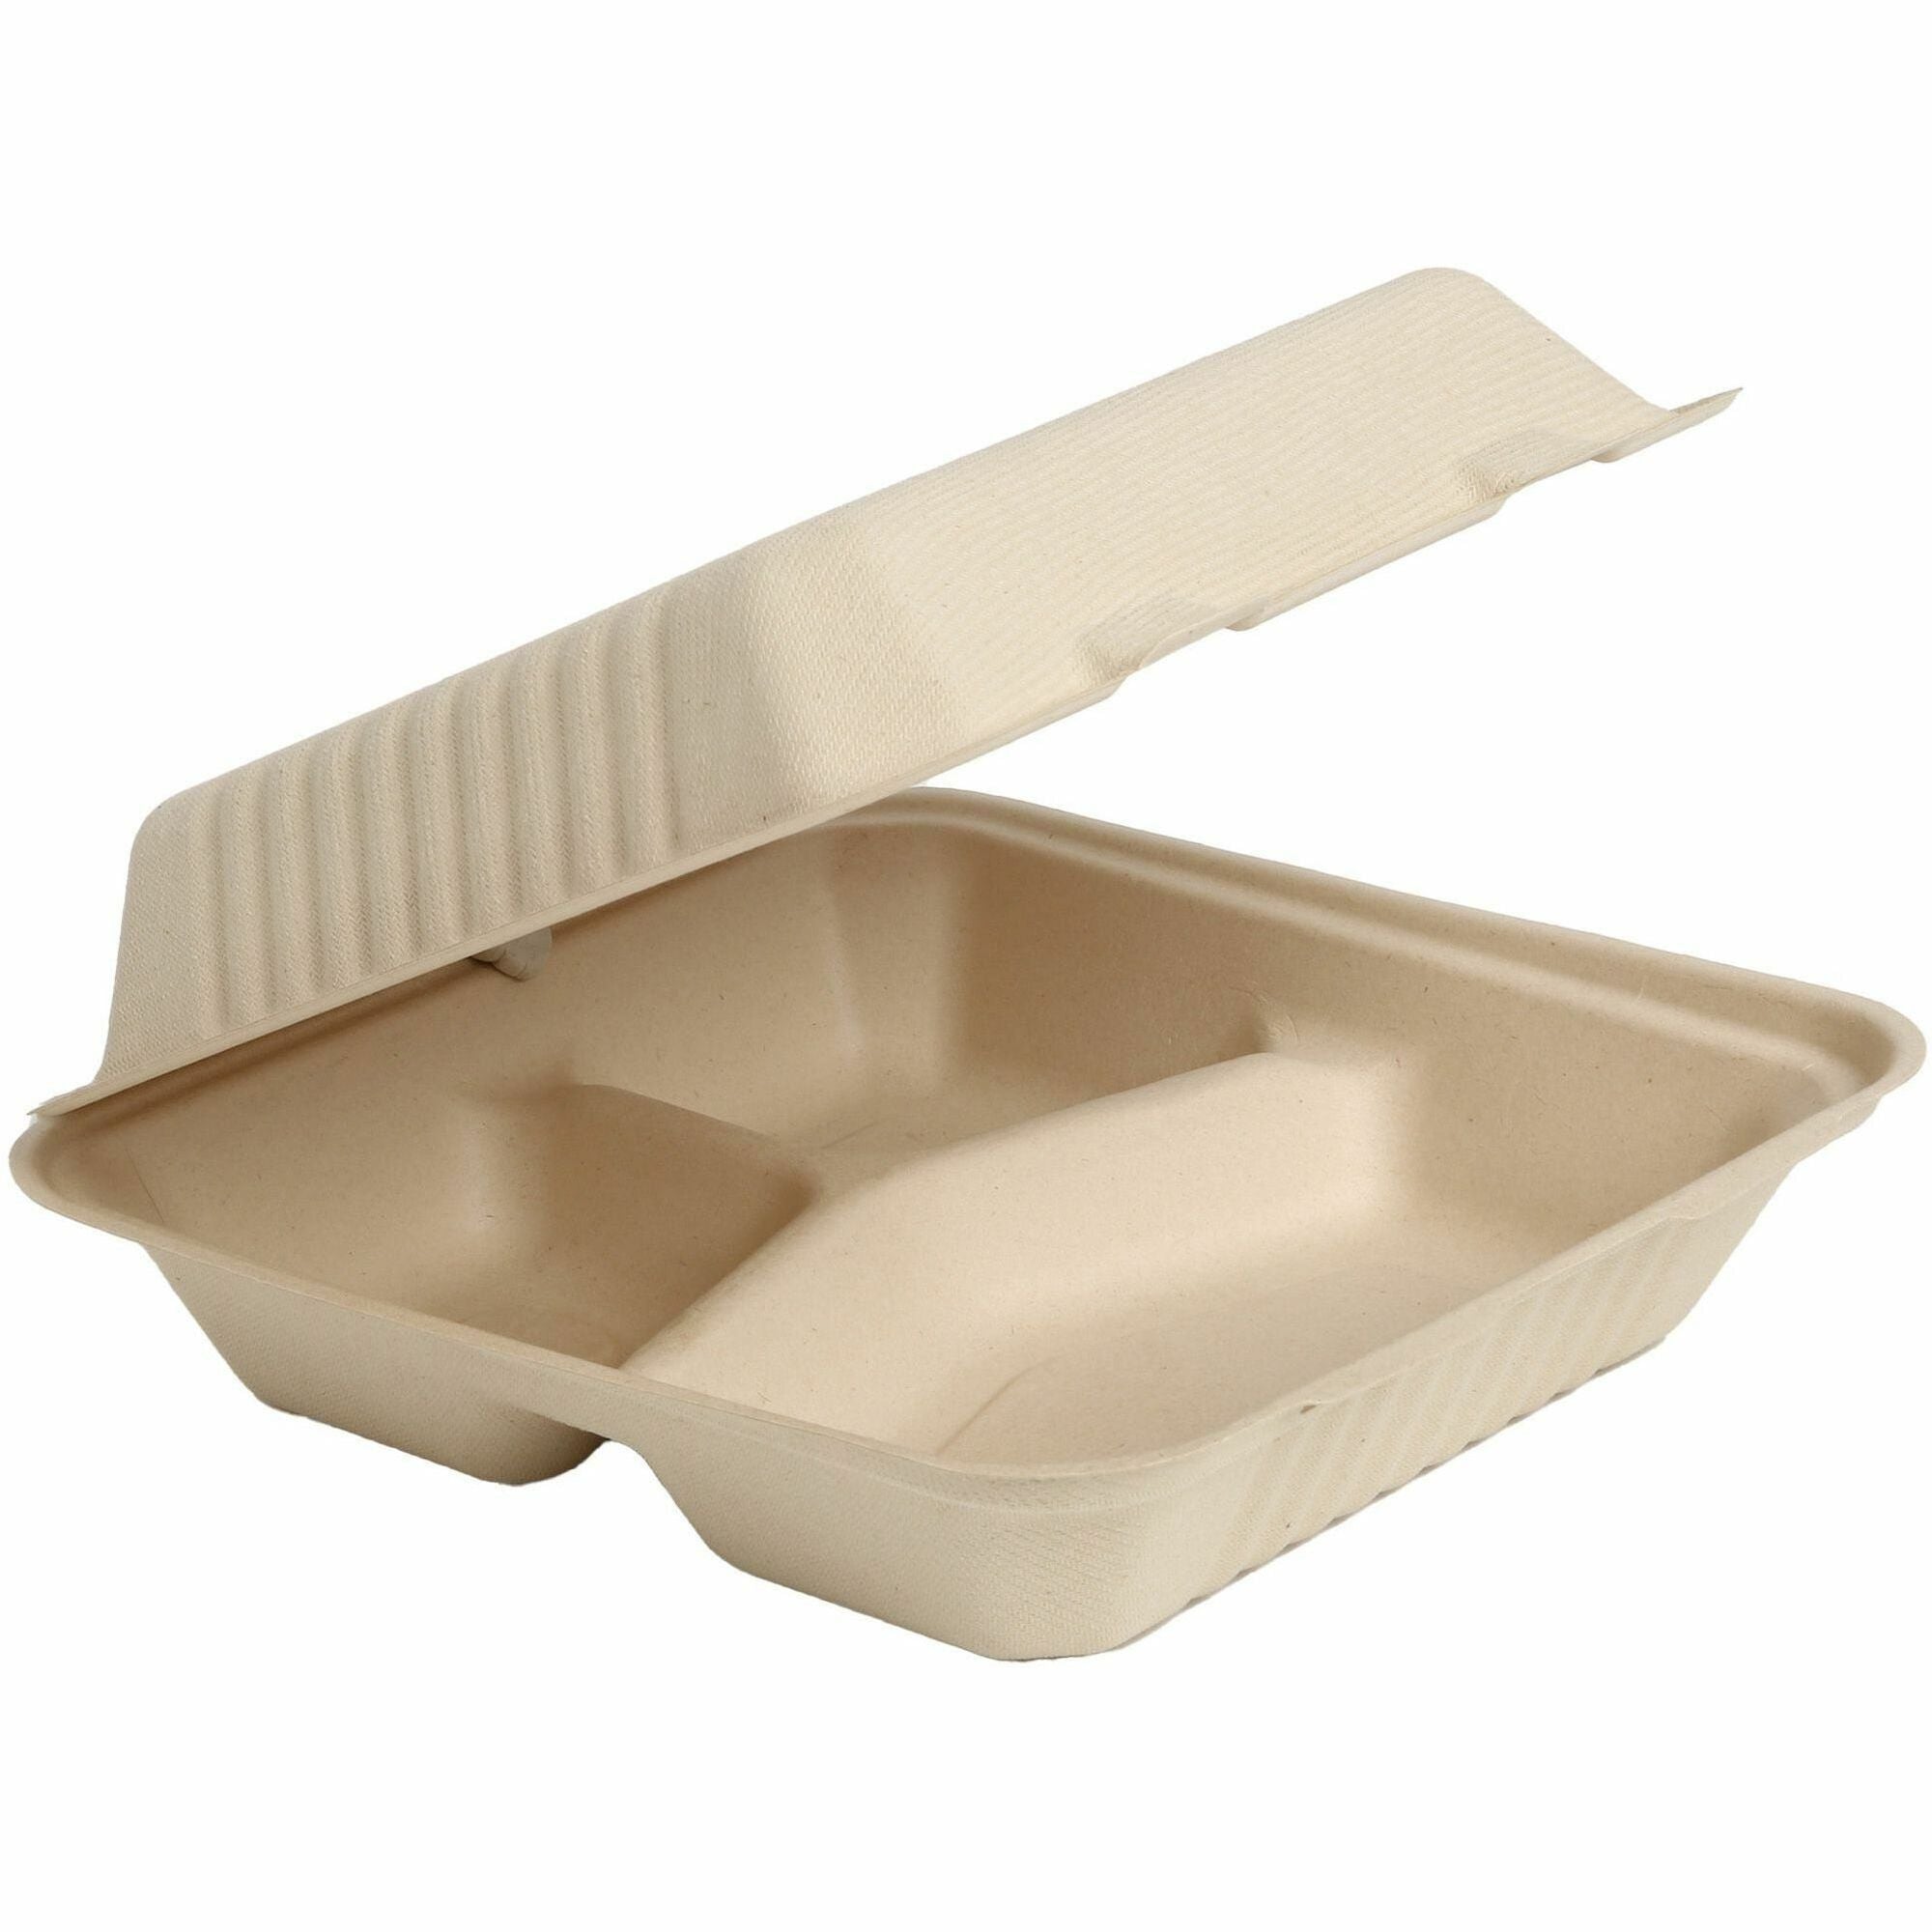 BluTable 39 oz 3-Compartment Portable Clamshell Containers - Food - Natural - Molded Fiber, Sugarcane Fiber Body - 200 / Carton - 1